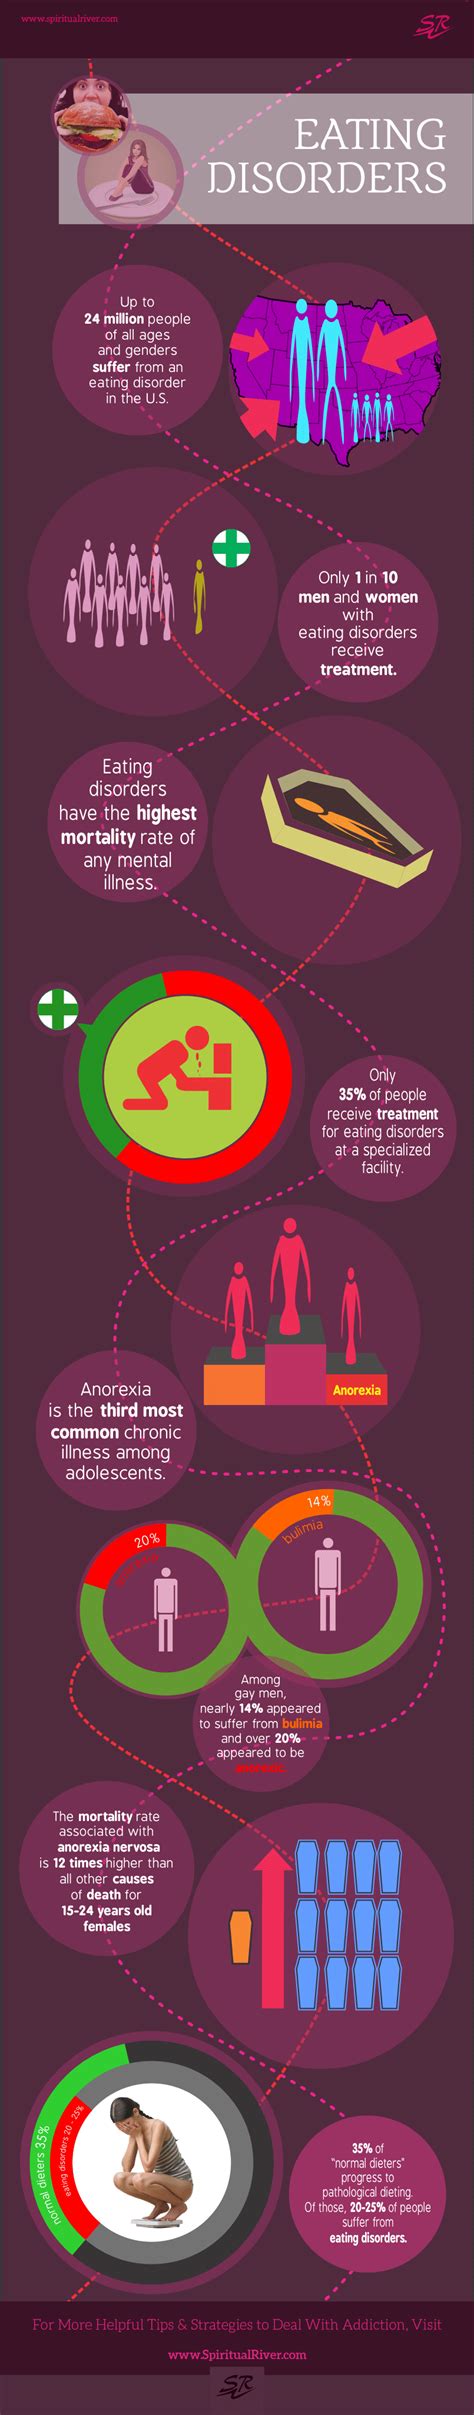 eating disorders and addiction [infographic] infographic plaza